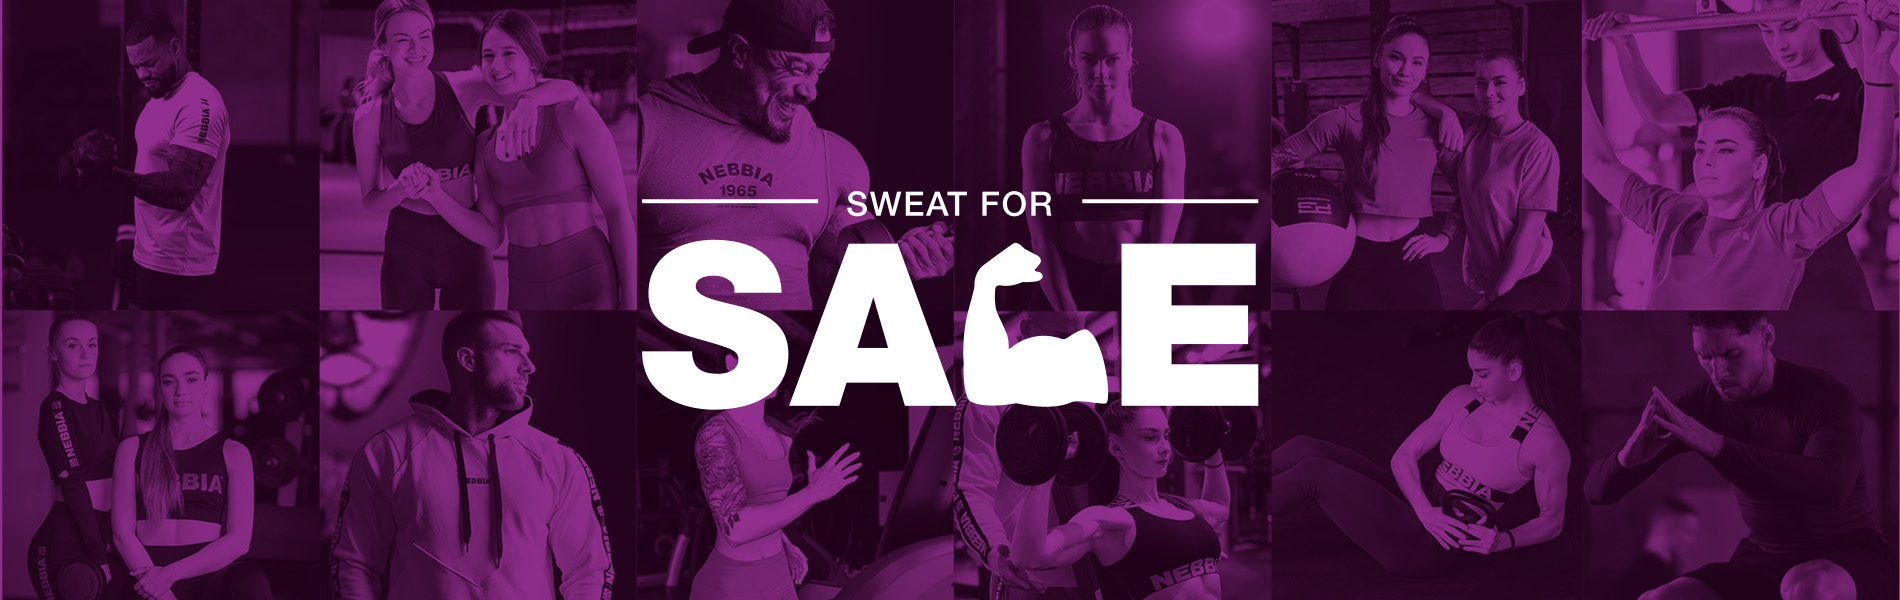 SWEAT FOR SALE I Mujeres